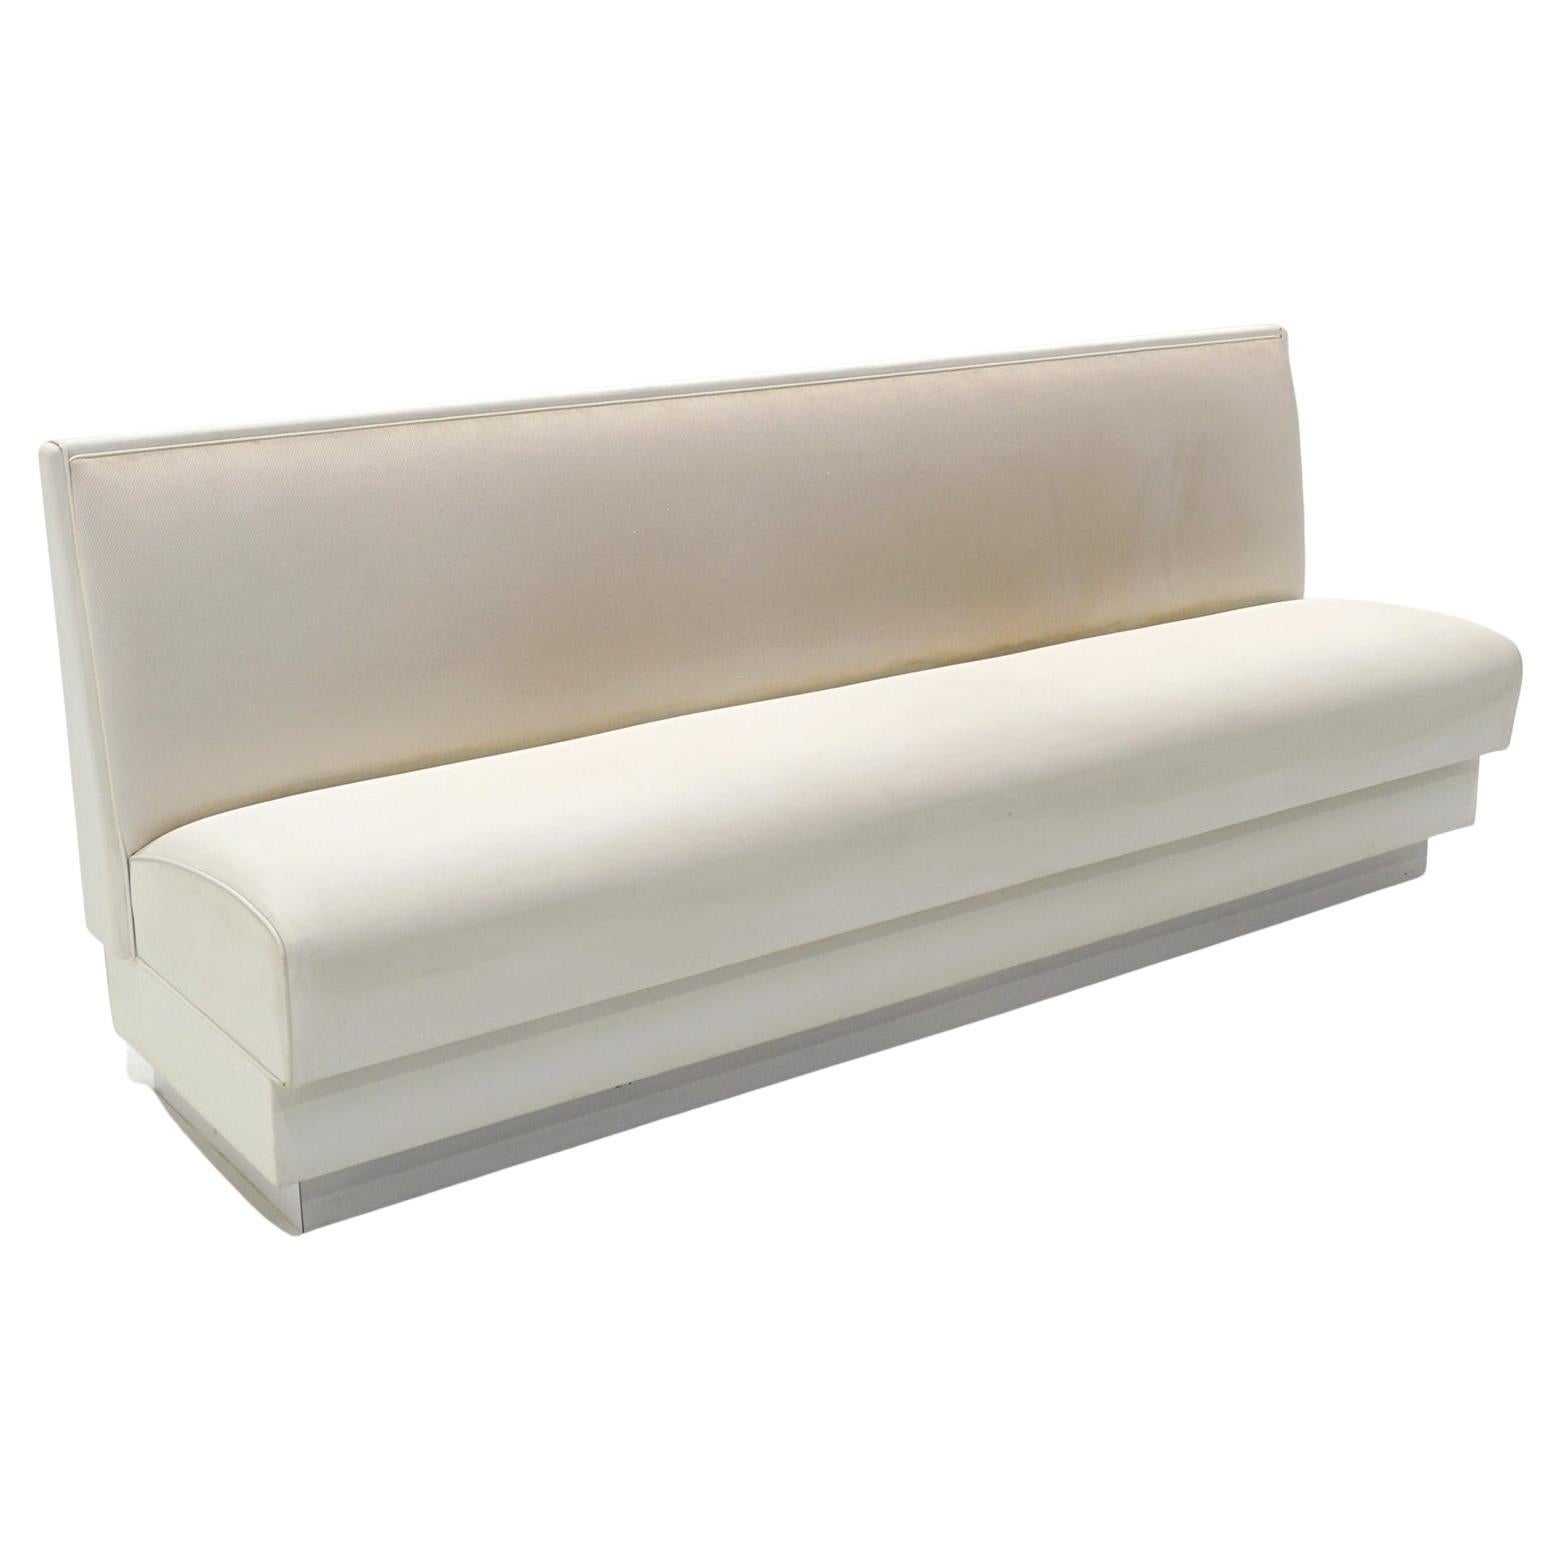 Banquette in Off White Upholstery. Custom built. 7 Feet, 3 inches Long. For Sale